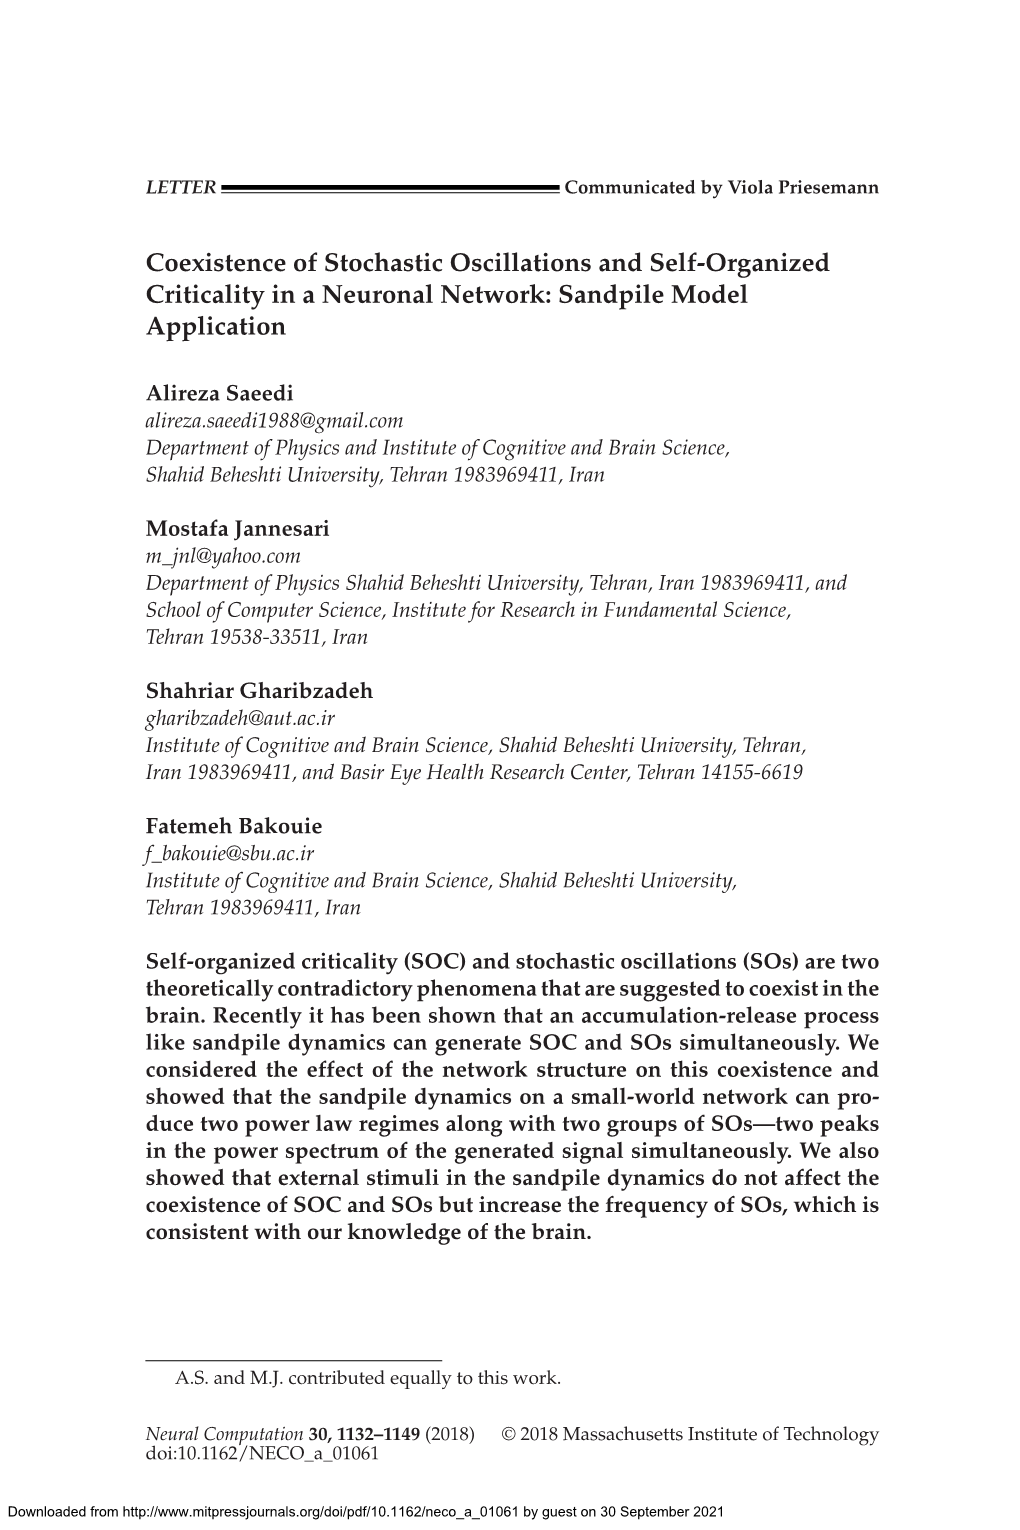 Coexistence of Stochastic Oscillations and Self-Organized Criticality in a Neuronal Network: Sandpile Model Application